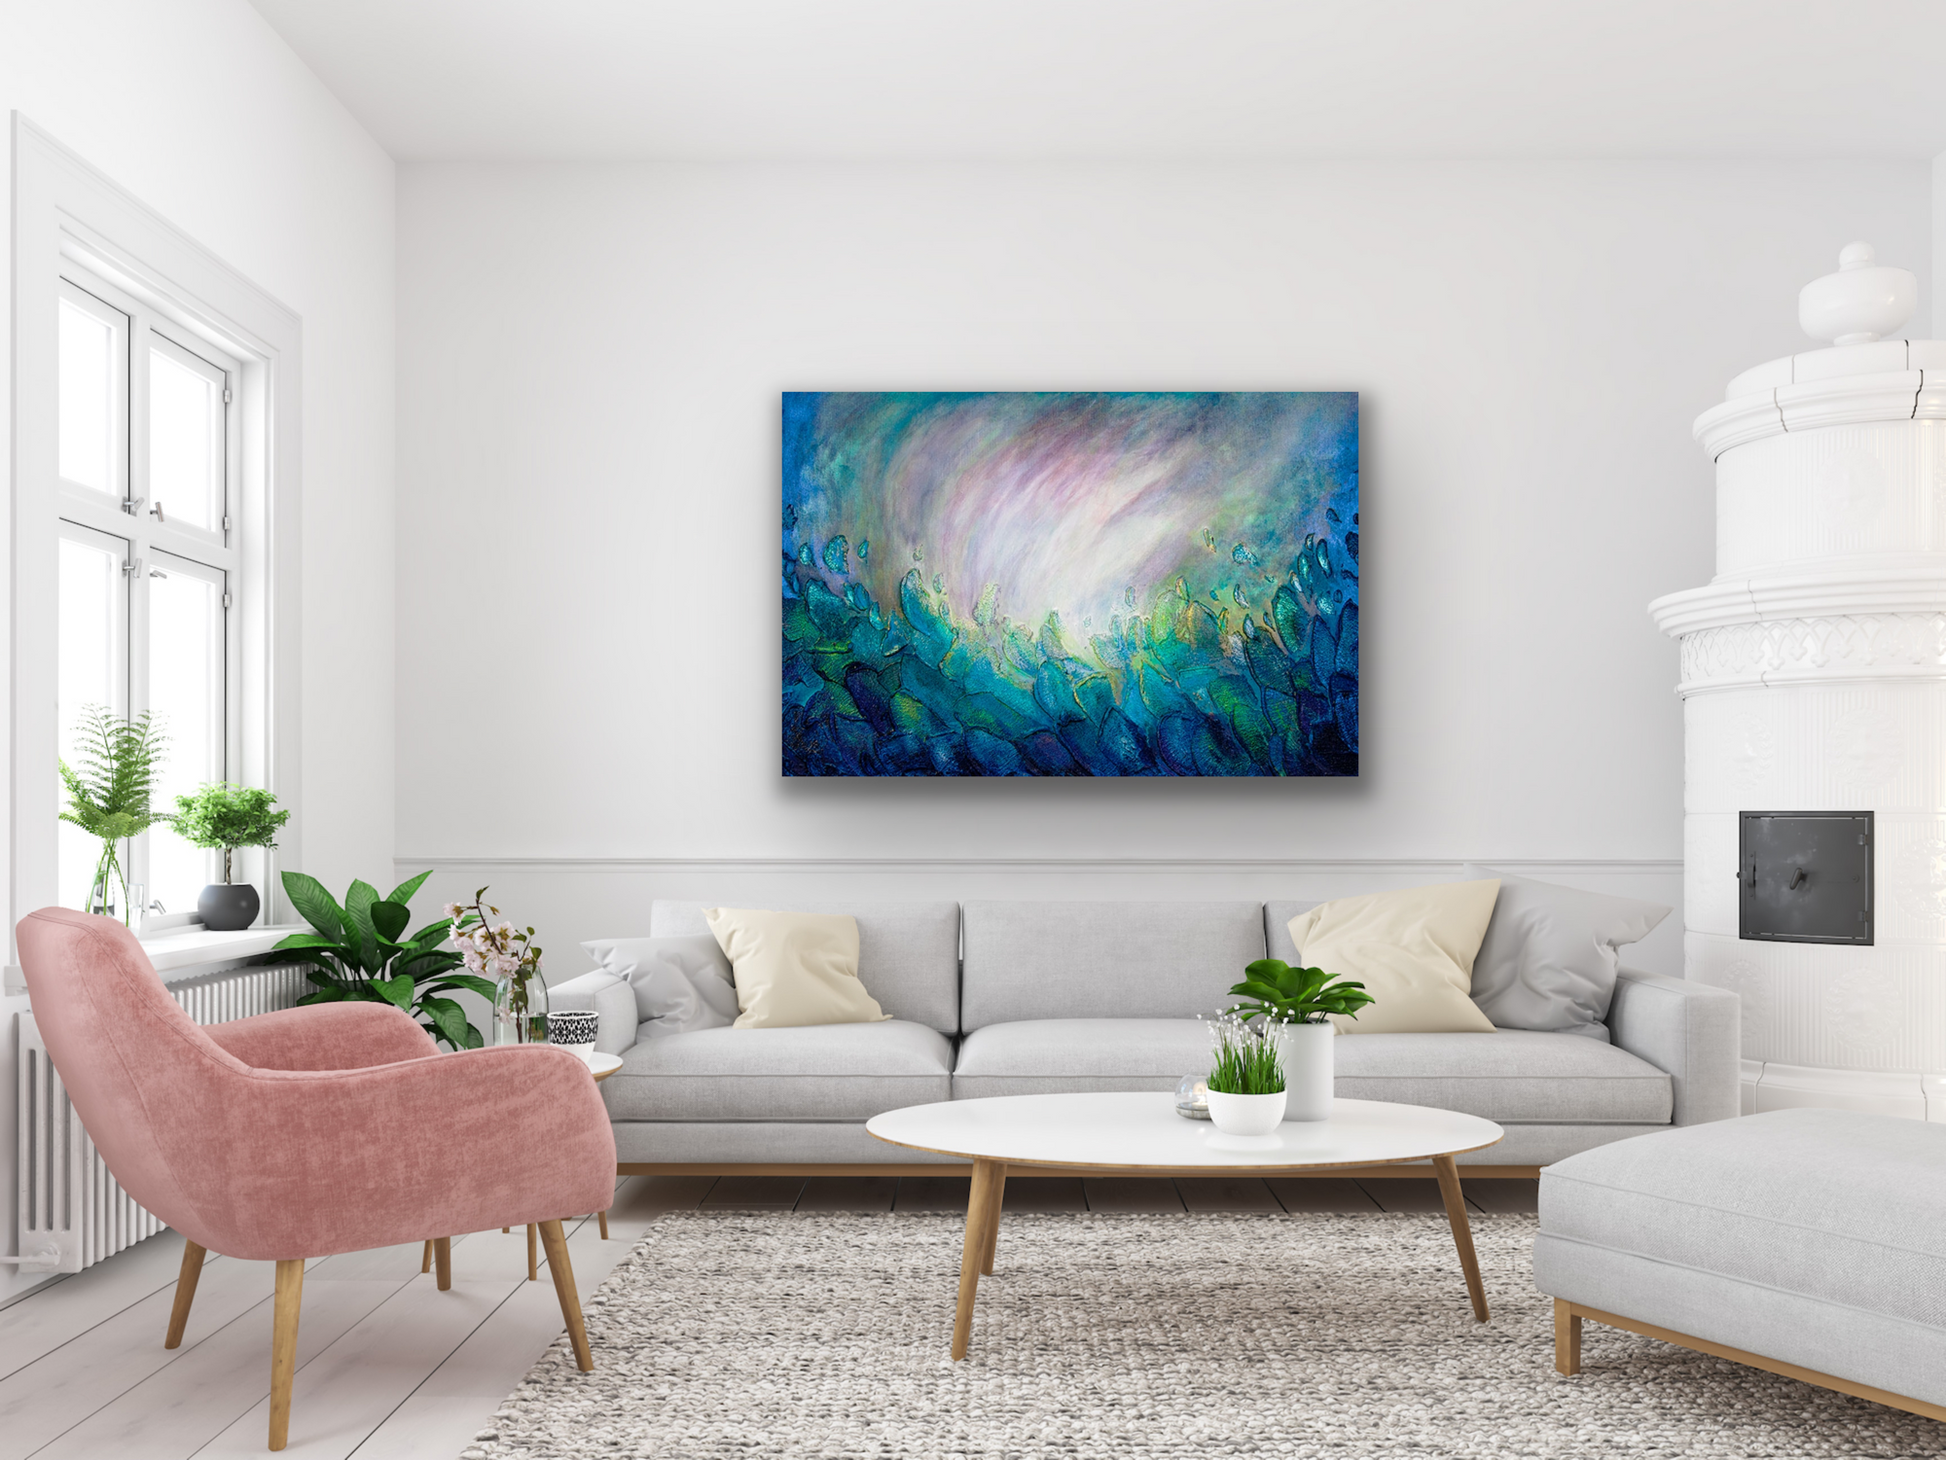 Turbulence by Tiffany Reid  is a abstract art piece that will look great in your living room, dining room or hallway.